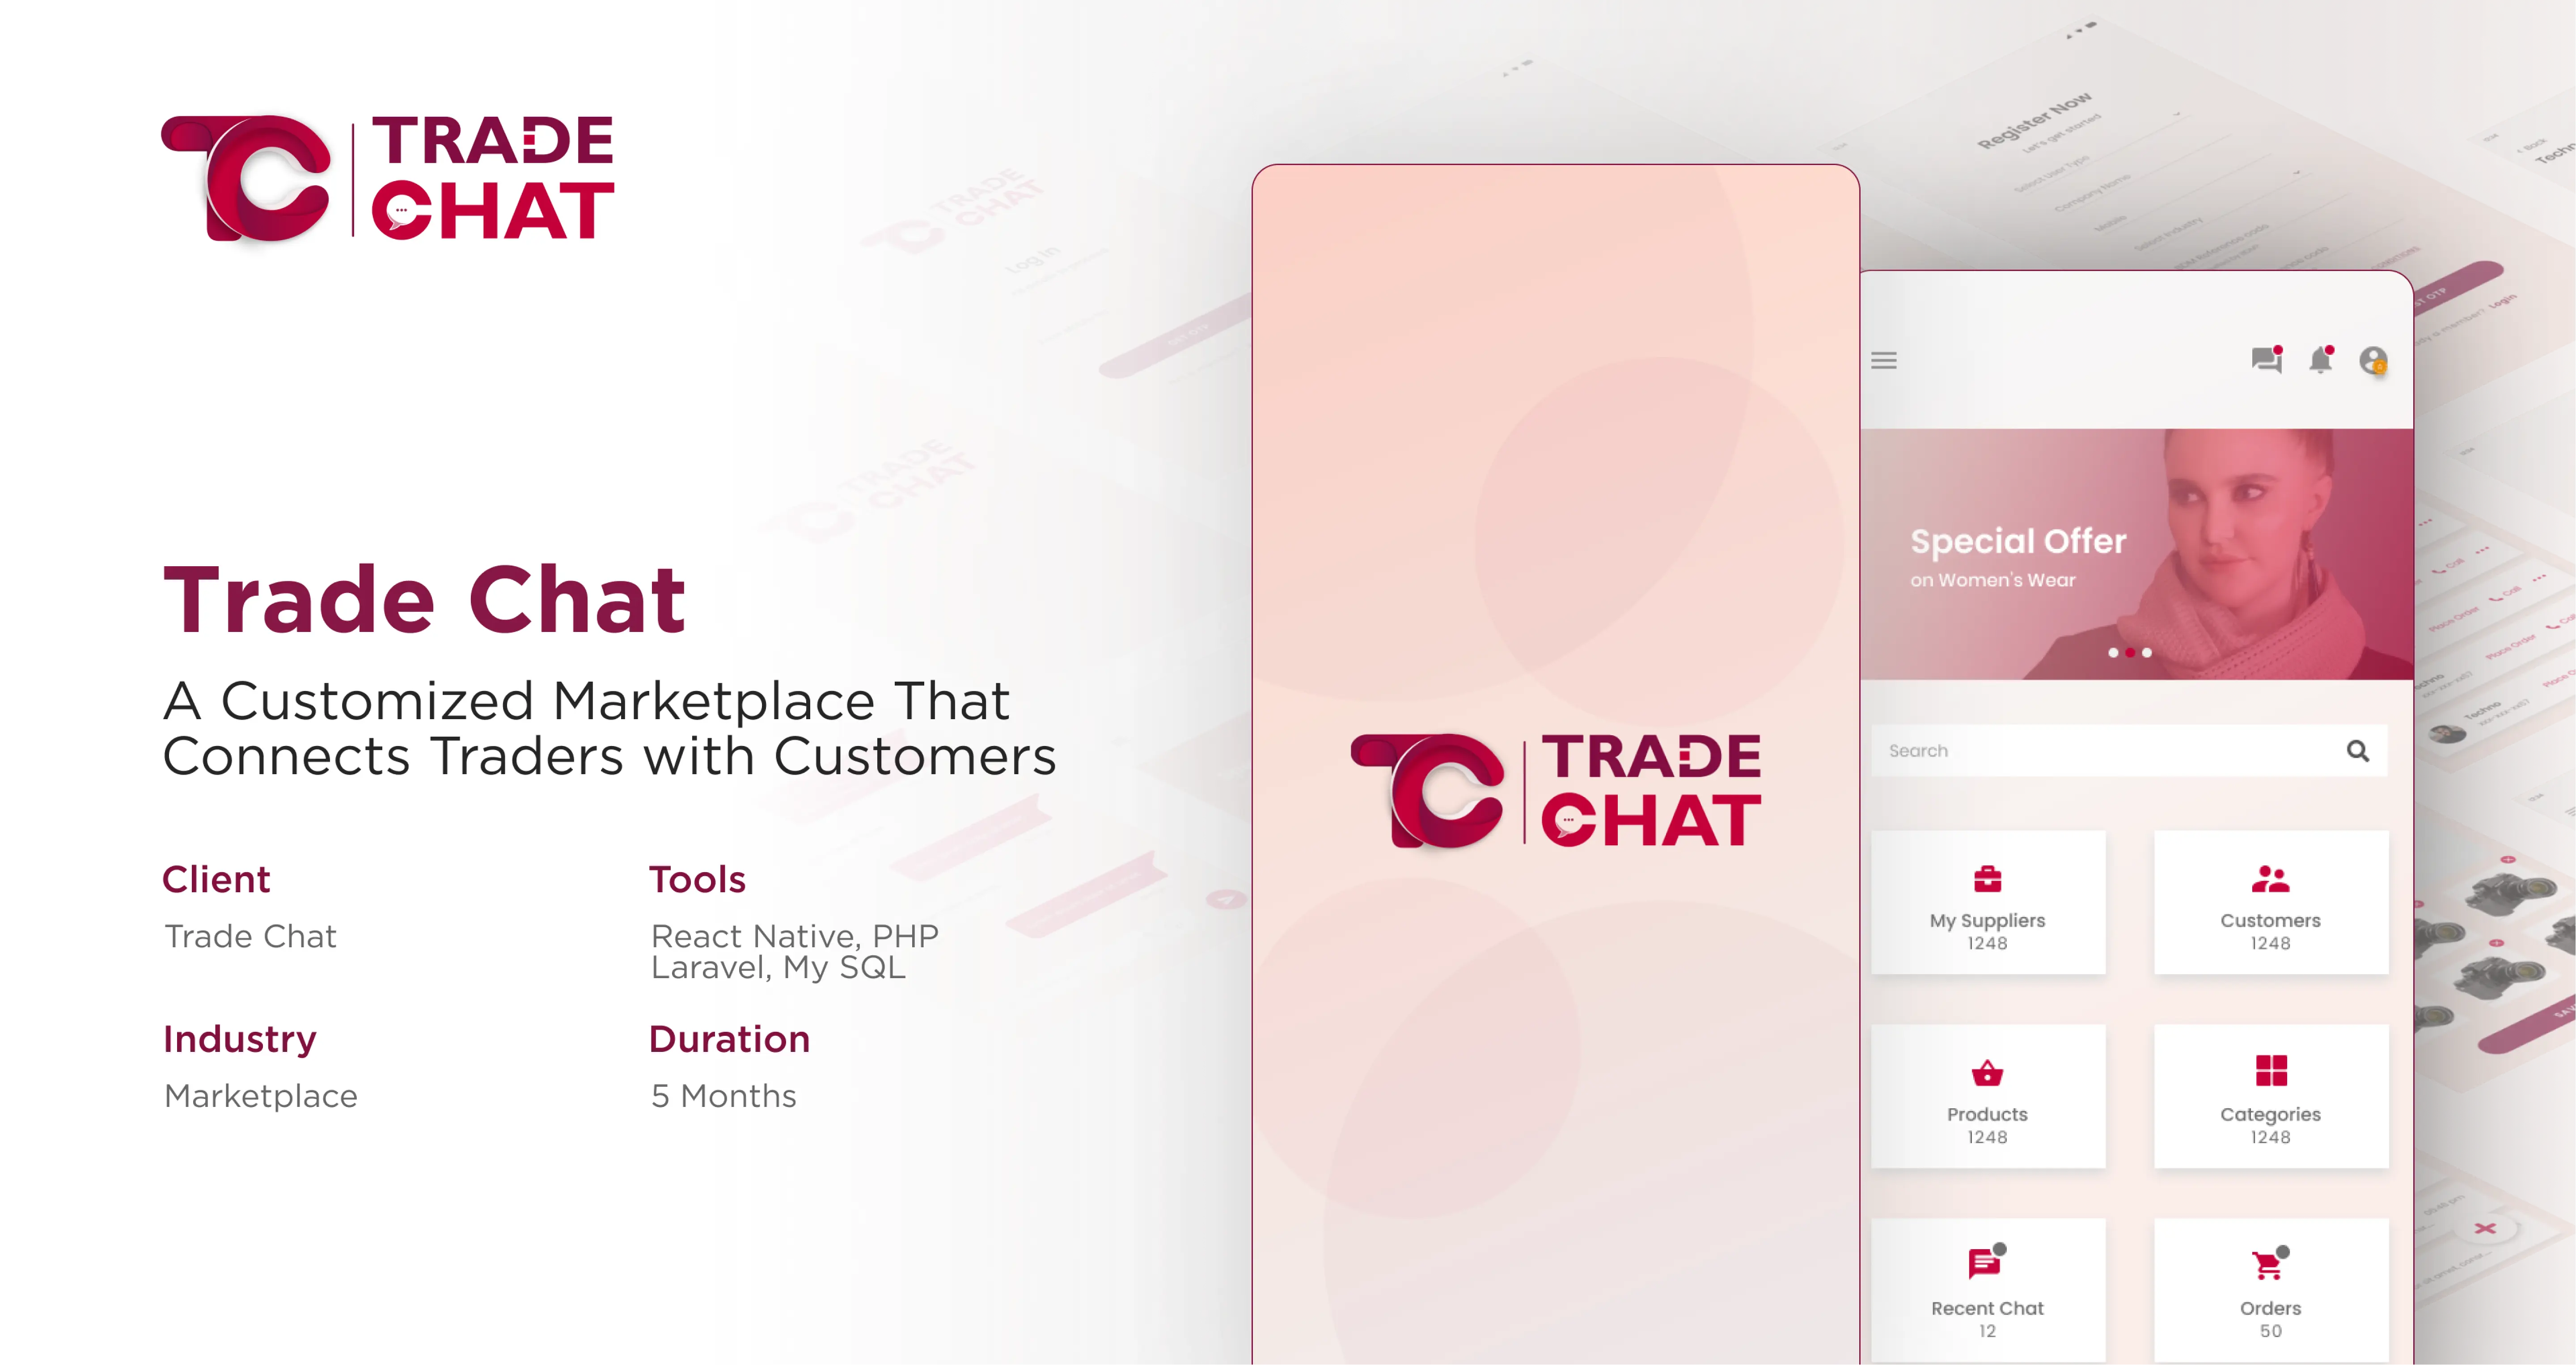 Case study of a popolar customized mobile application, Trade Chat